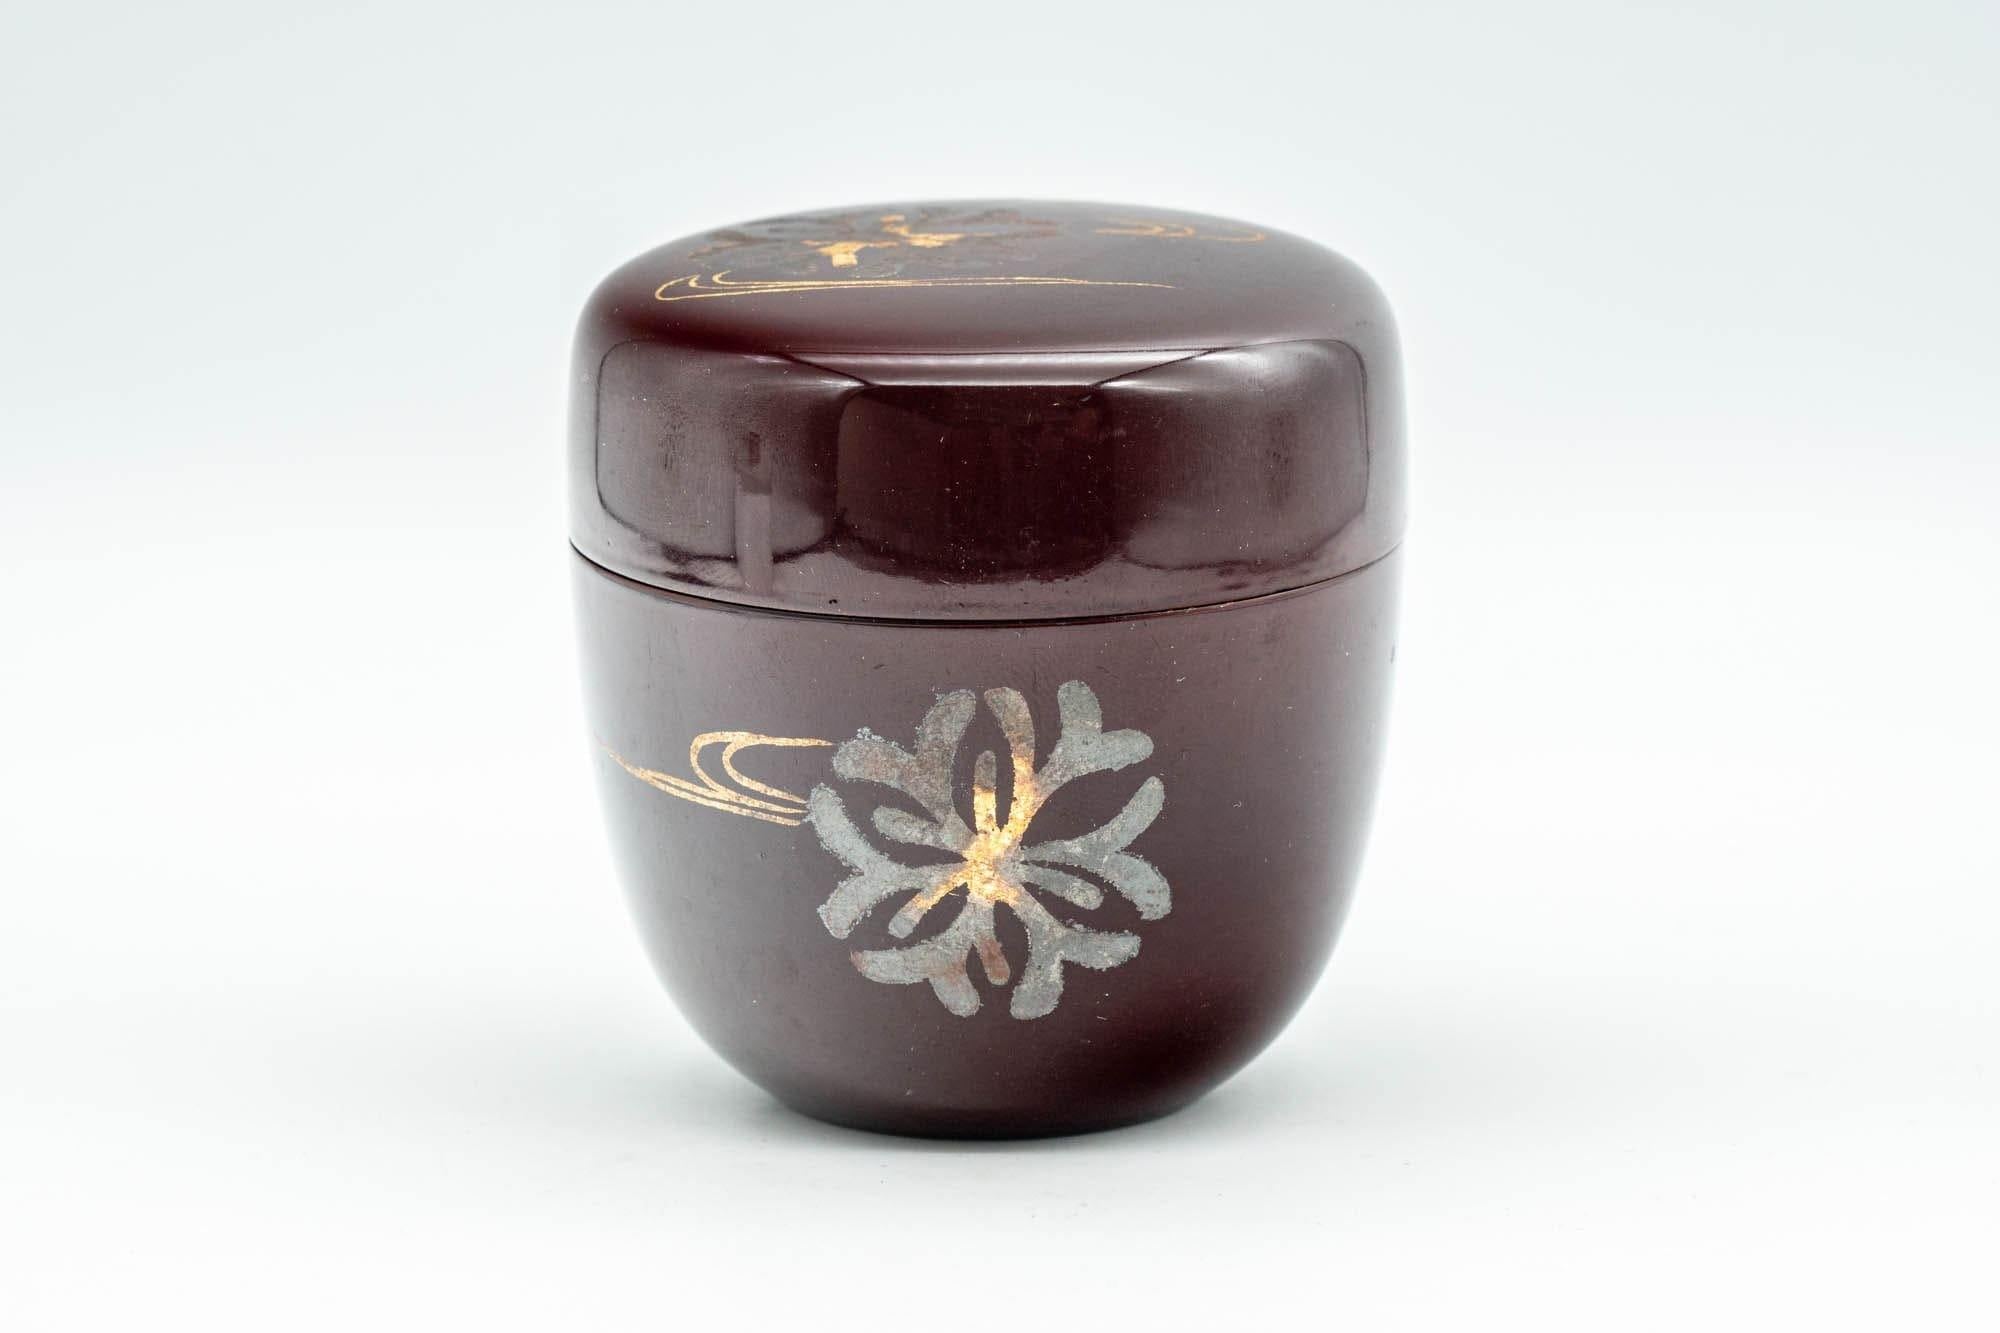 Japanese Natsume - Floral Red Burgundy Lacquer Matcha Tea Caddy - 100ml - Tezumi